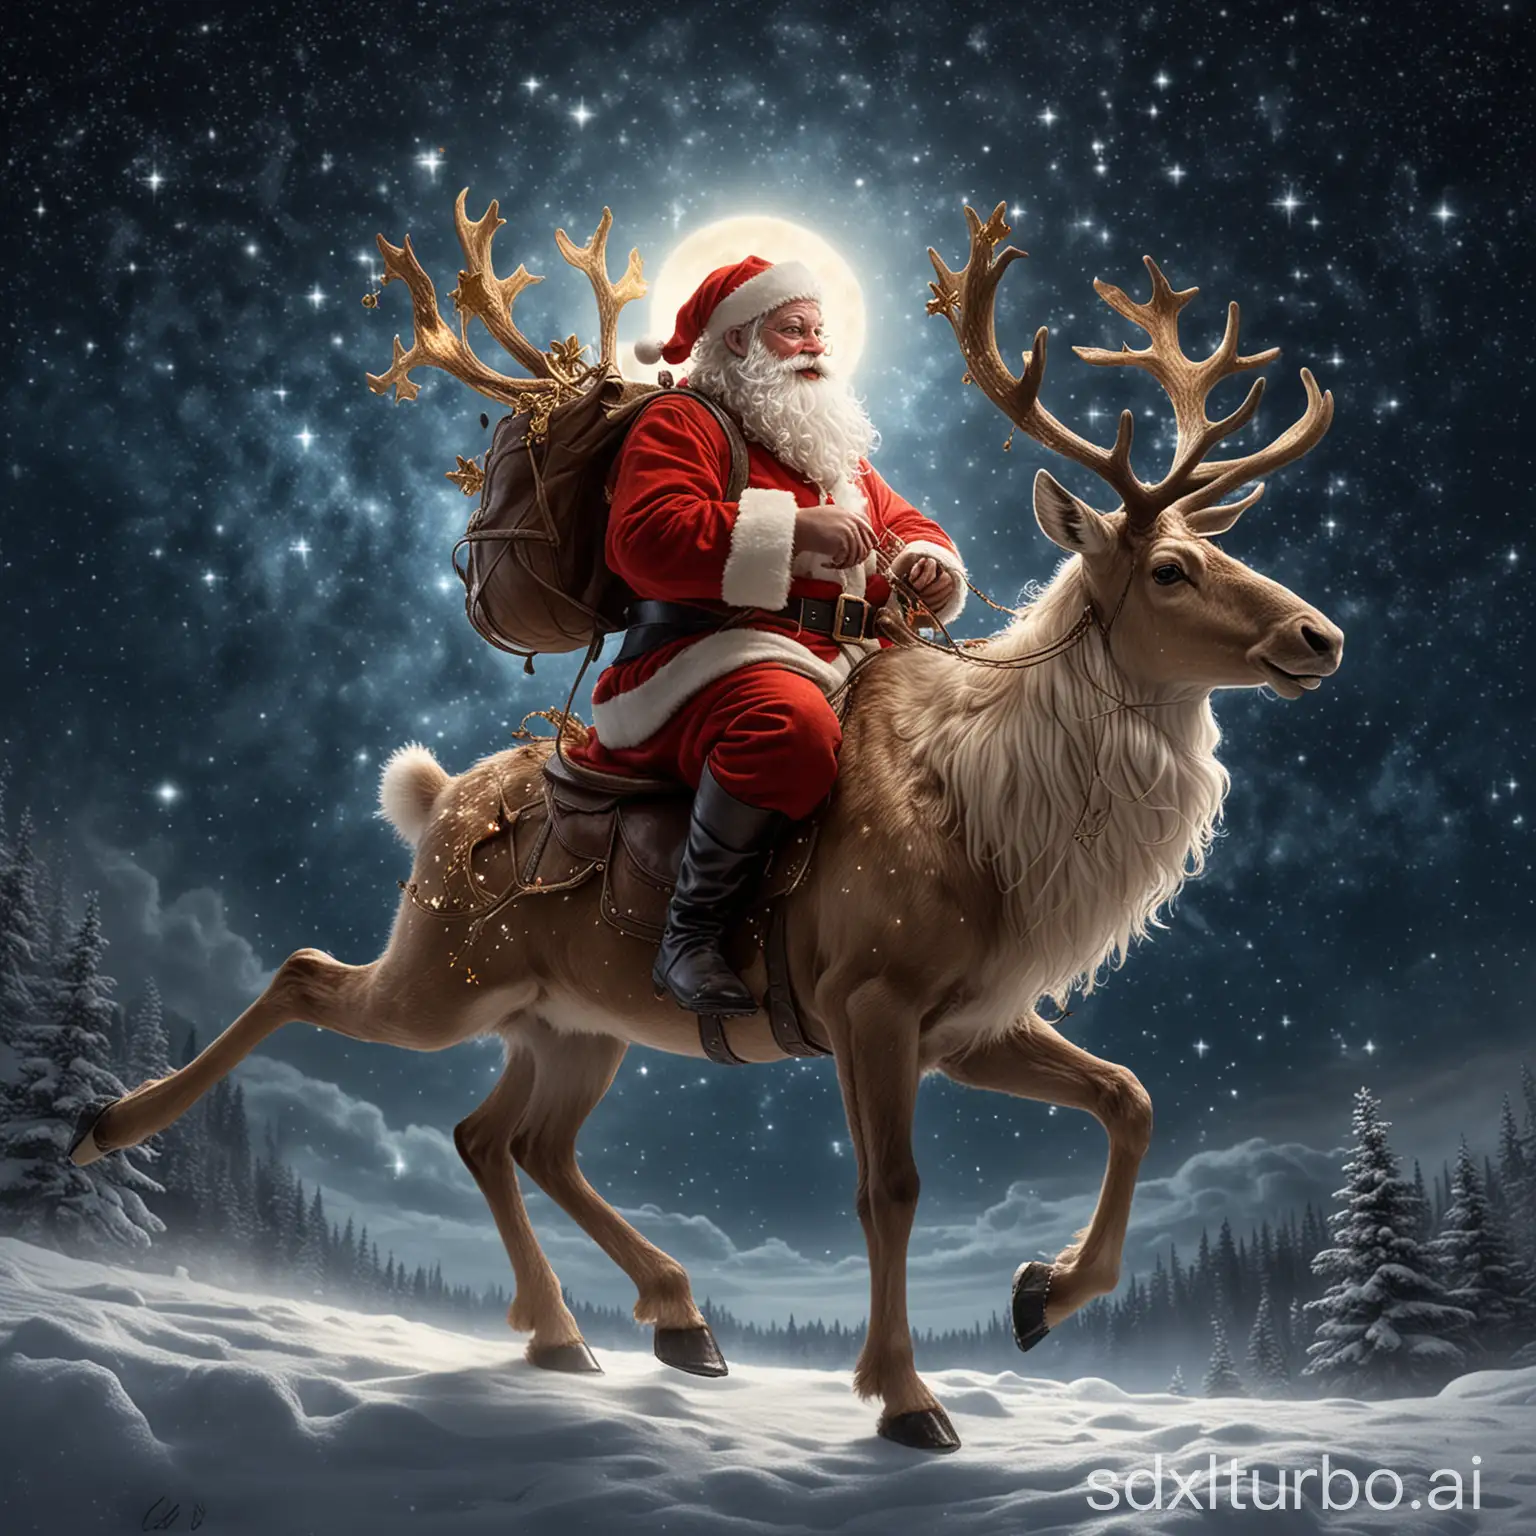 Santa, how he rides on a shimmering reindeer, which carries him up into the night sky, where the stars are his only companions.